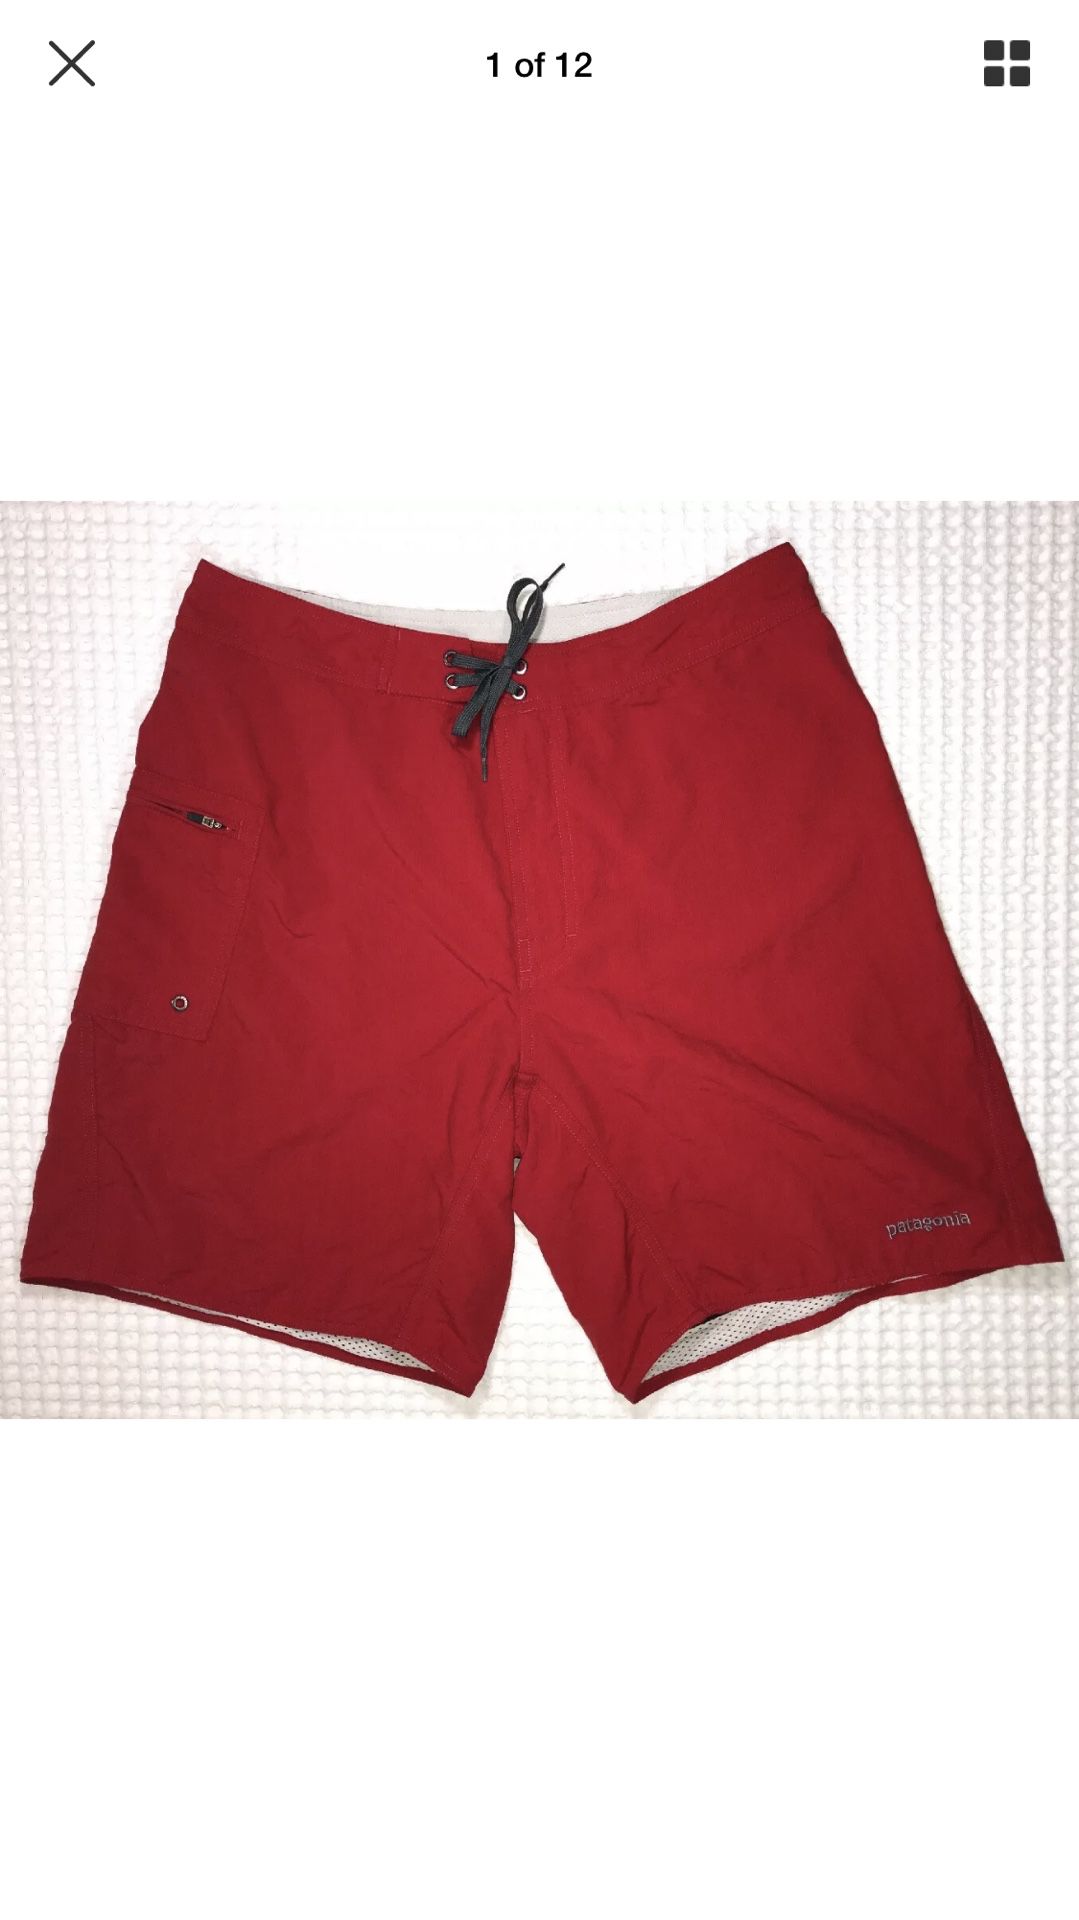 Red Patagonia board shorts size 34